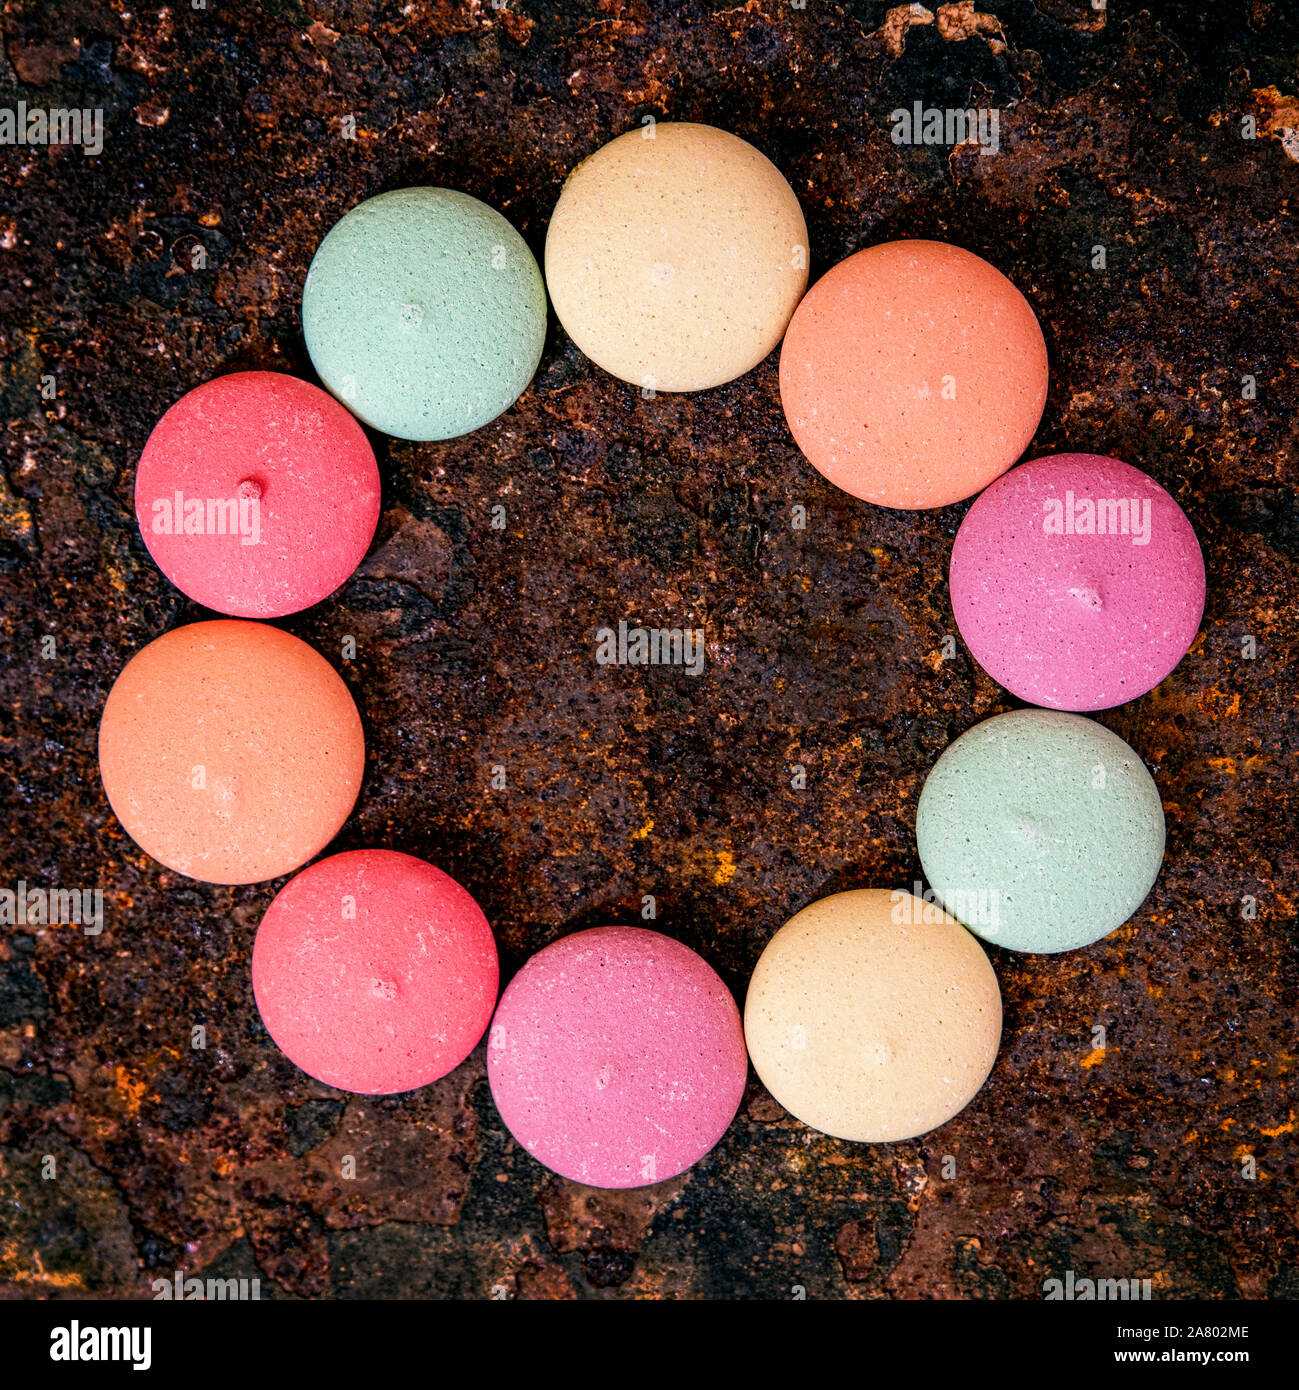 Topview, sweet delicious and colorful cookies or biscuits on rusty background, candy circle Stock Photo